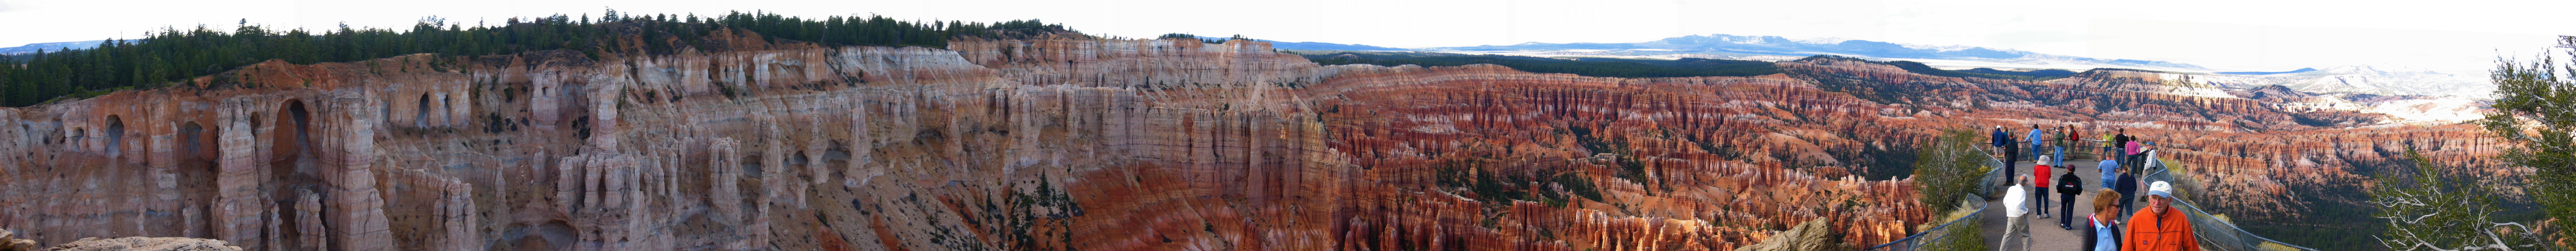 Bryce Canyon Amphitheater from Bryce Point (8298ft).